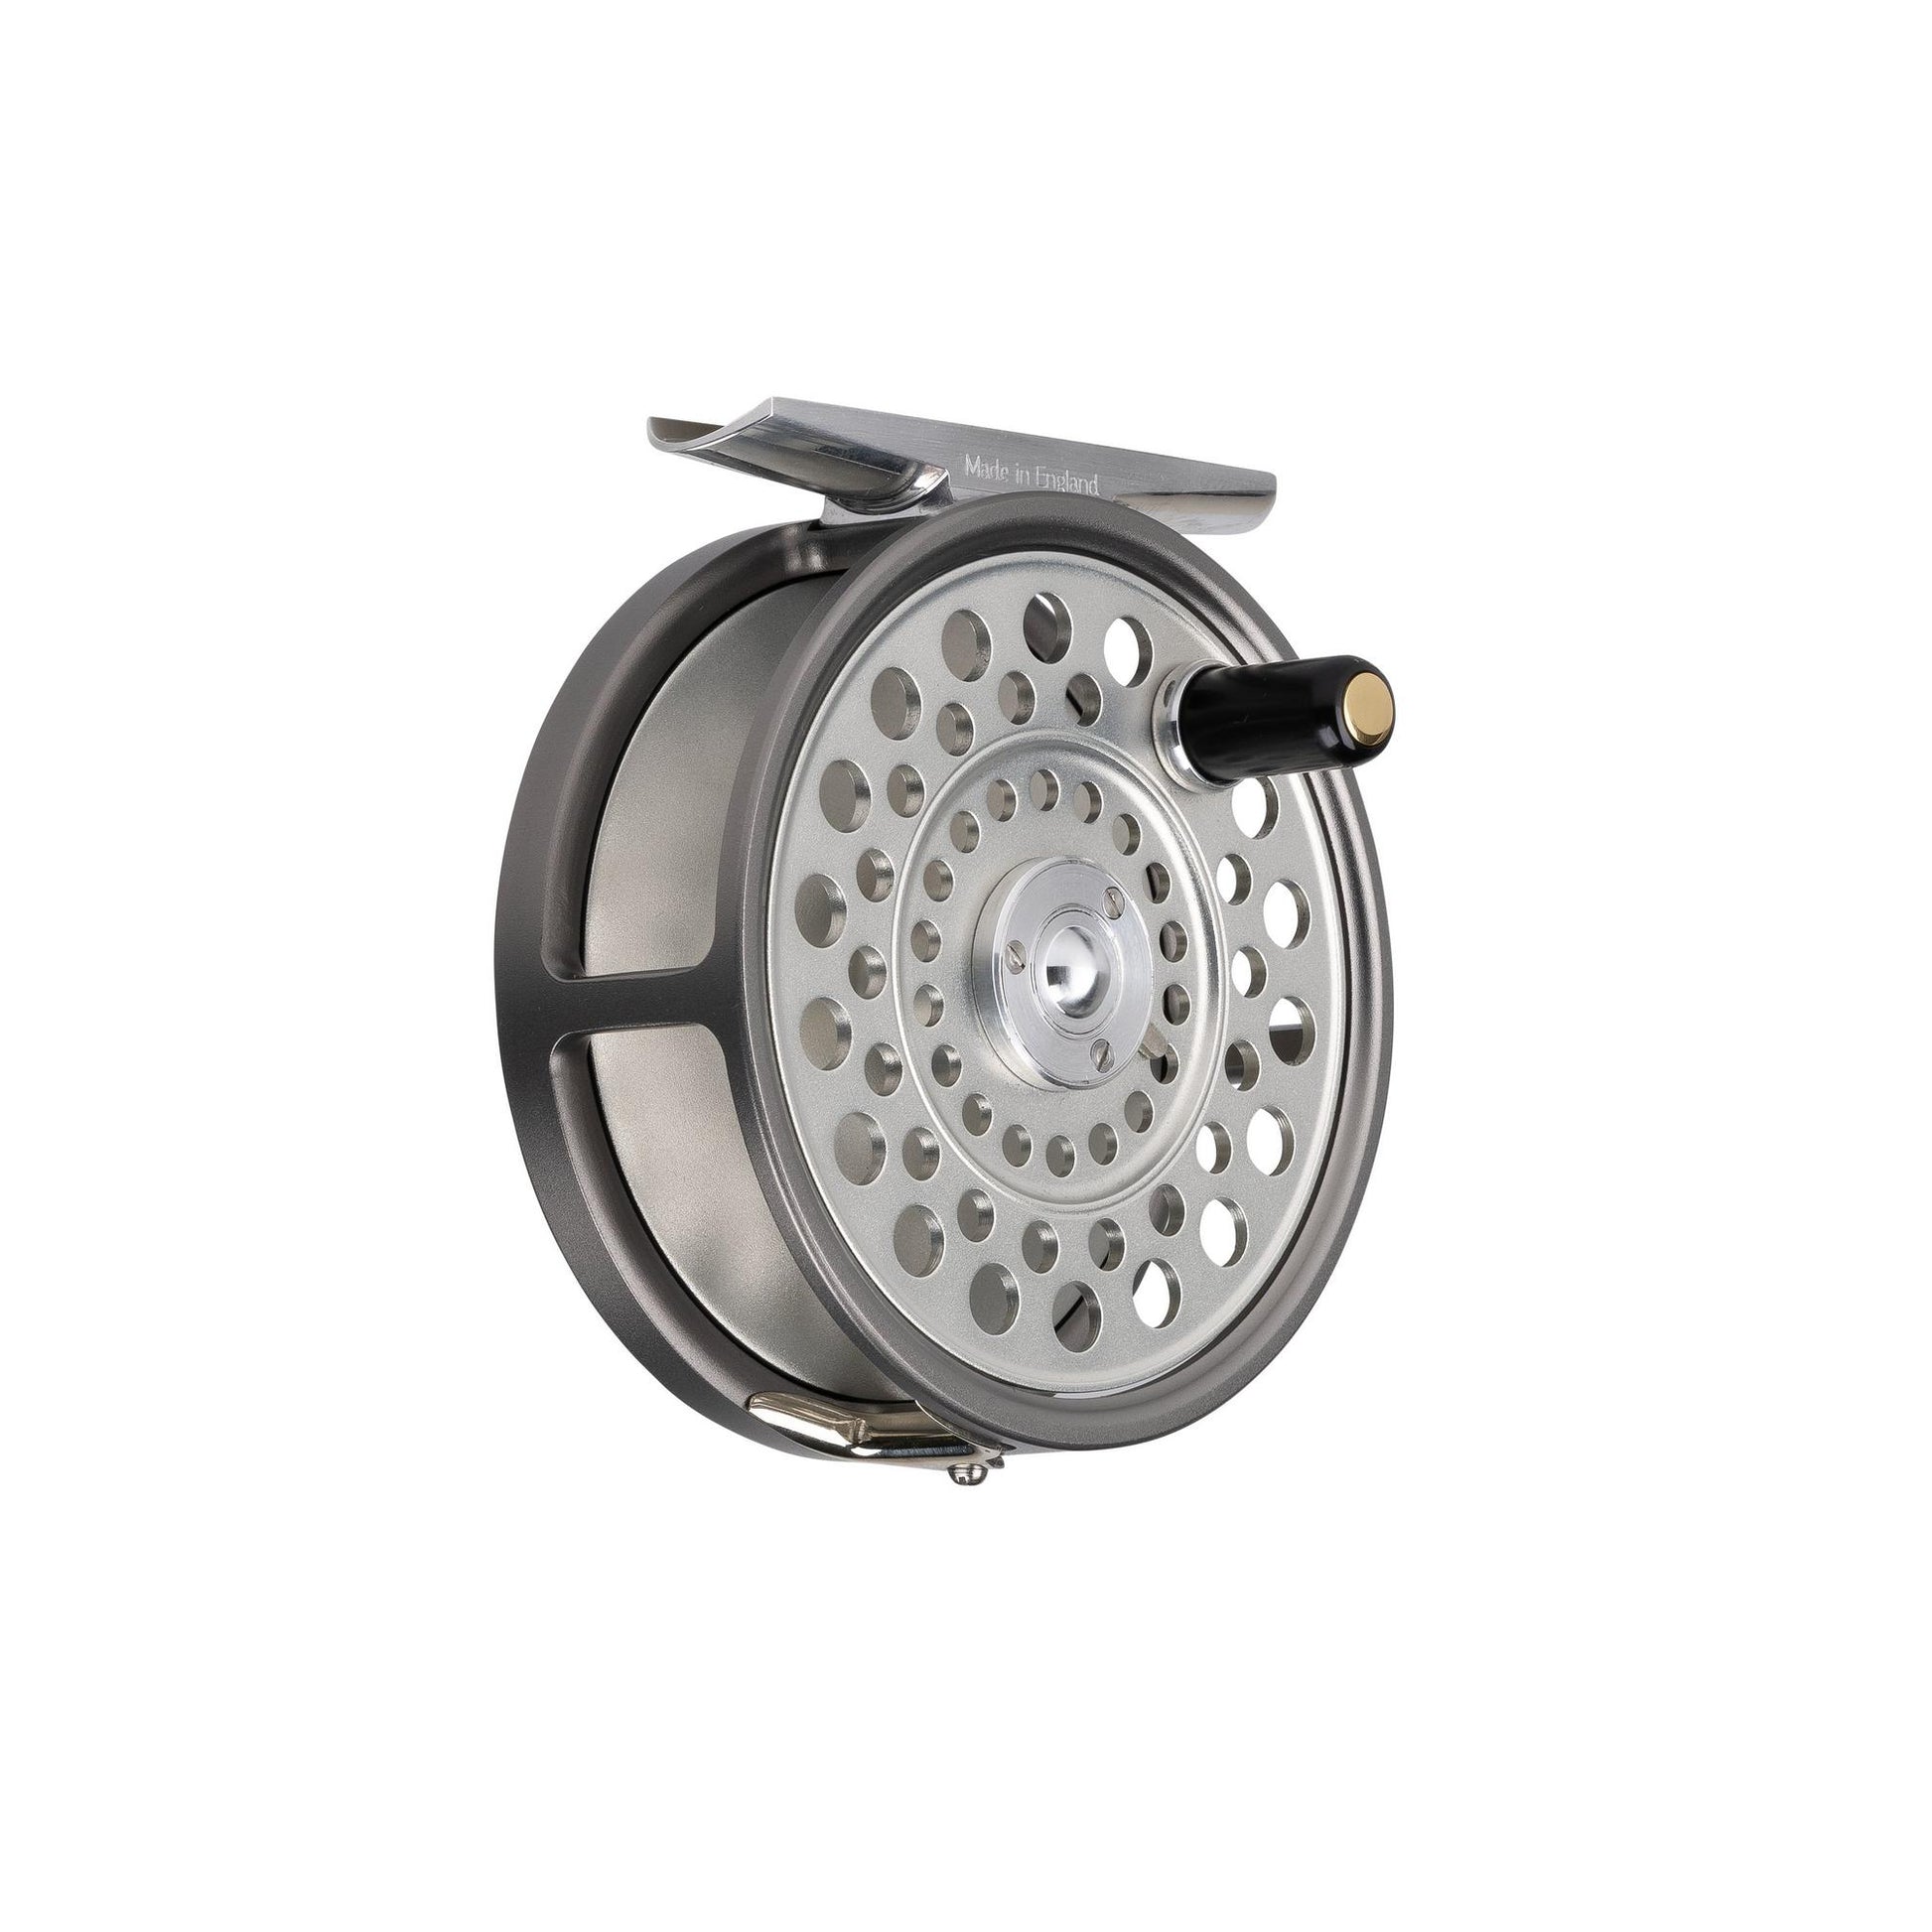 Hardy Featherweight 4/5wt Fly Reel for Sale- Light & Durable